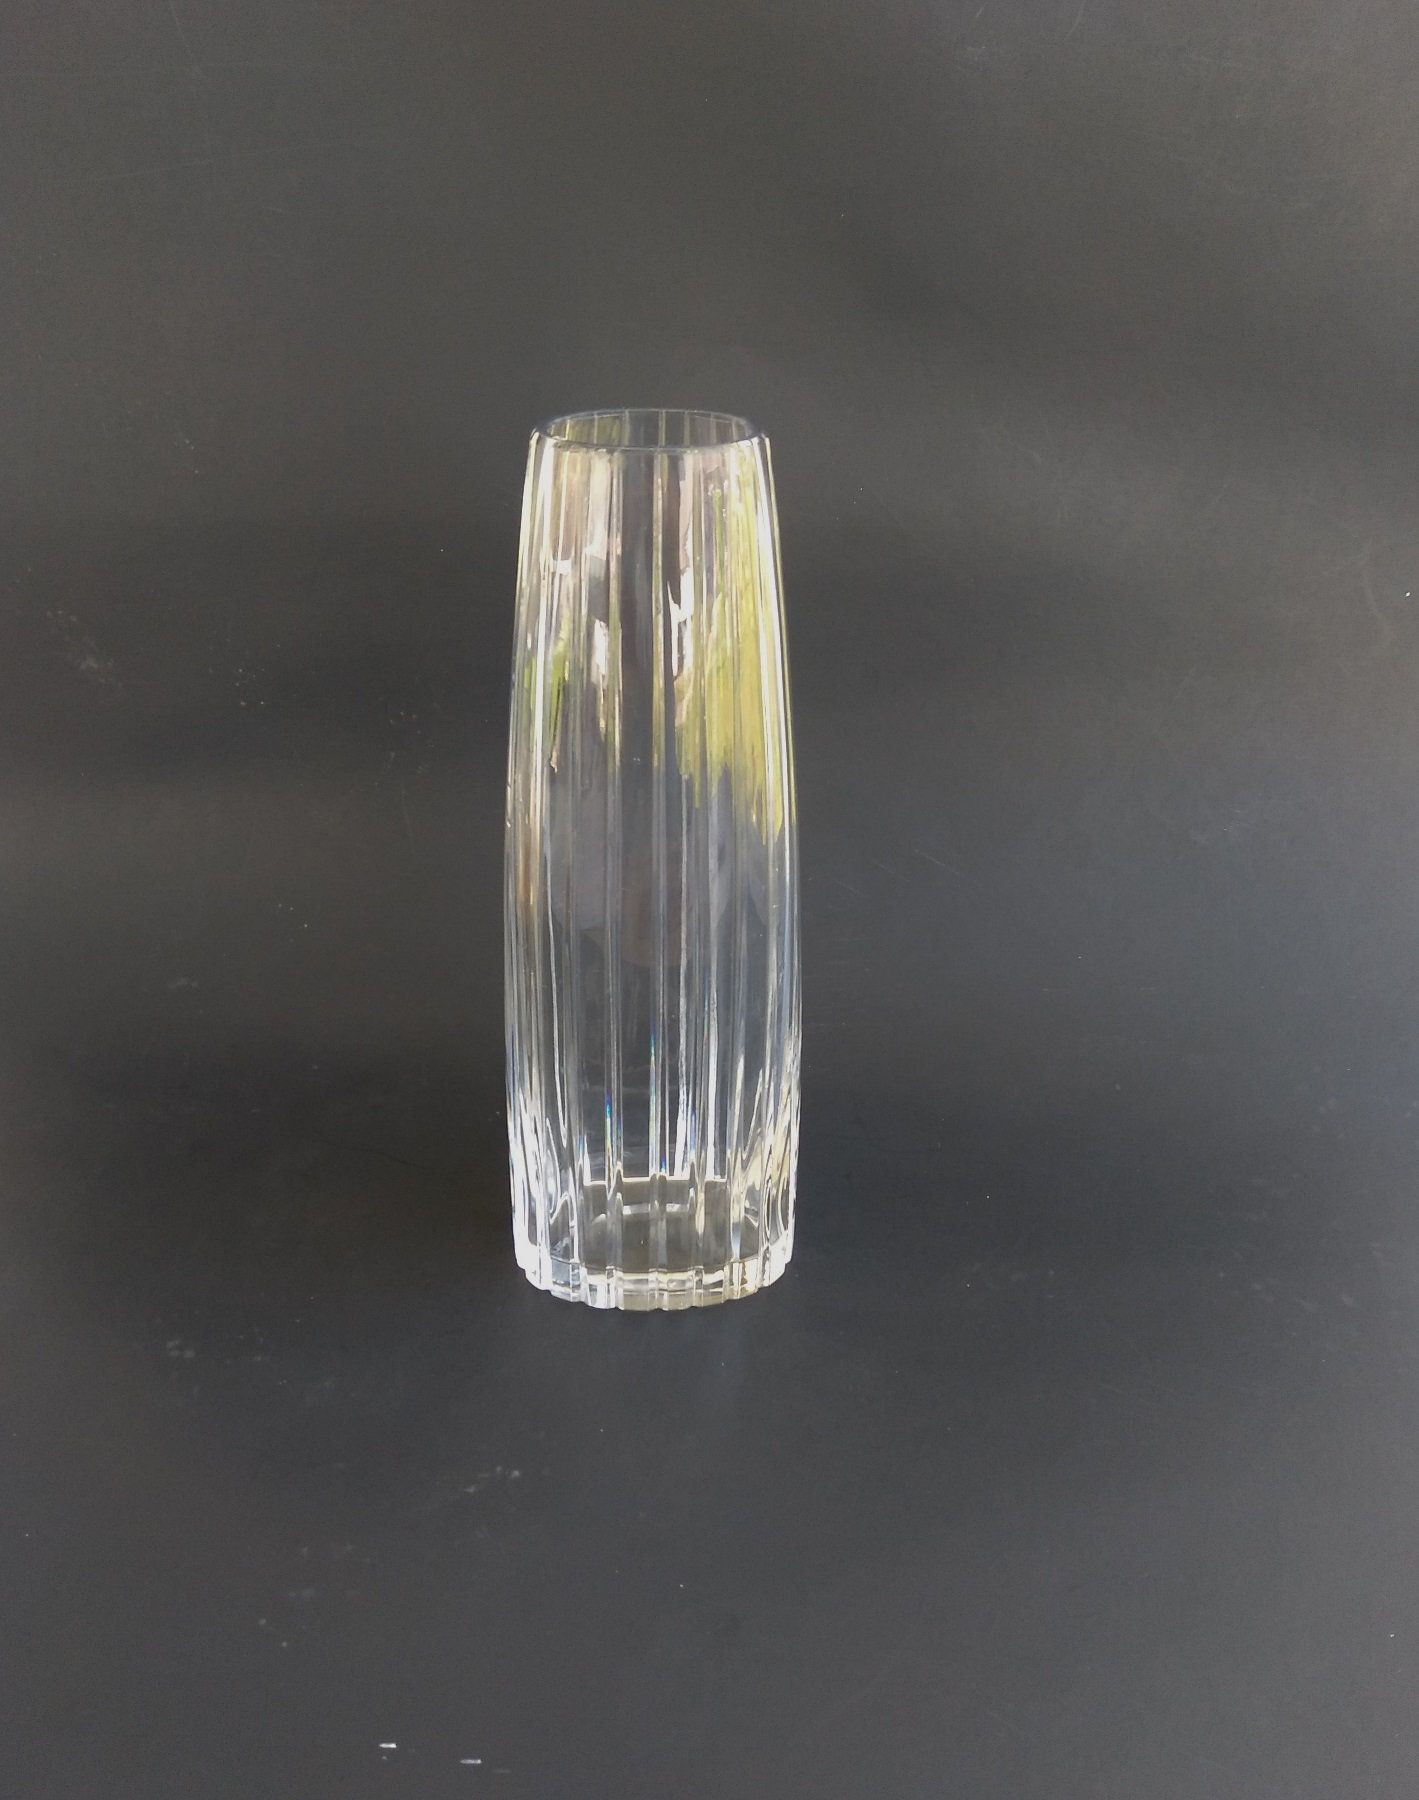 25 Stylish 10 Inch Clear Glass Vases 2024 free download 10 inch clear glass vases of excited to share the latest addition to my etsy shop signed regarding excited to share the latest addition to my etsy shop signed atlantis fantasy cut